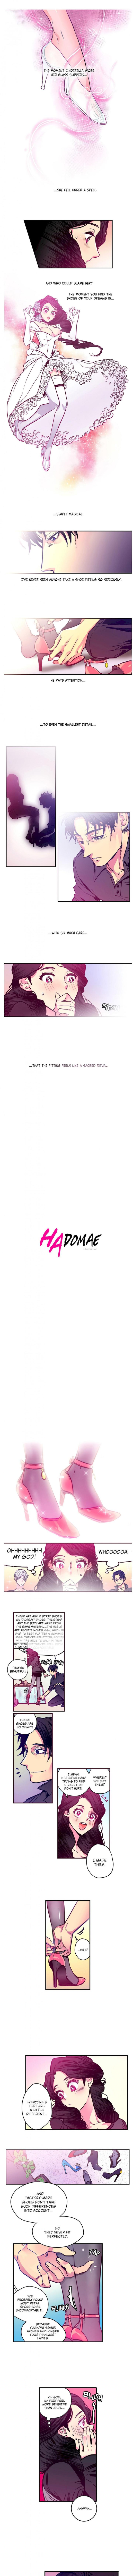 Hadomae - Chapter 3 Page 1